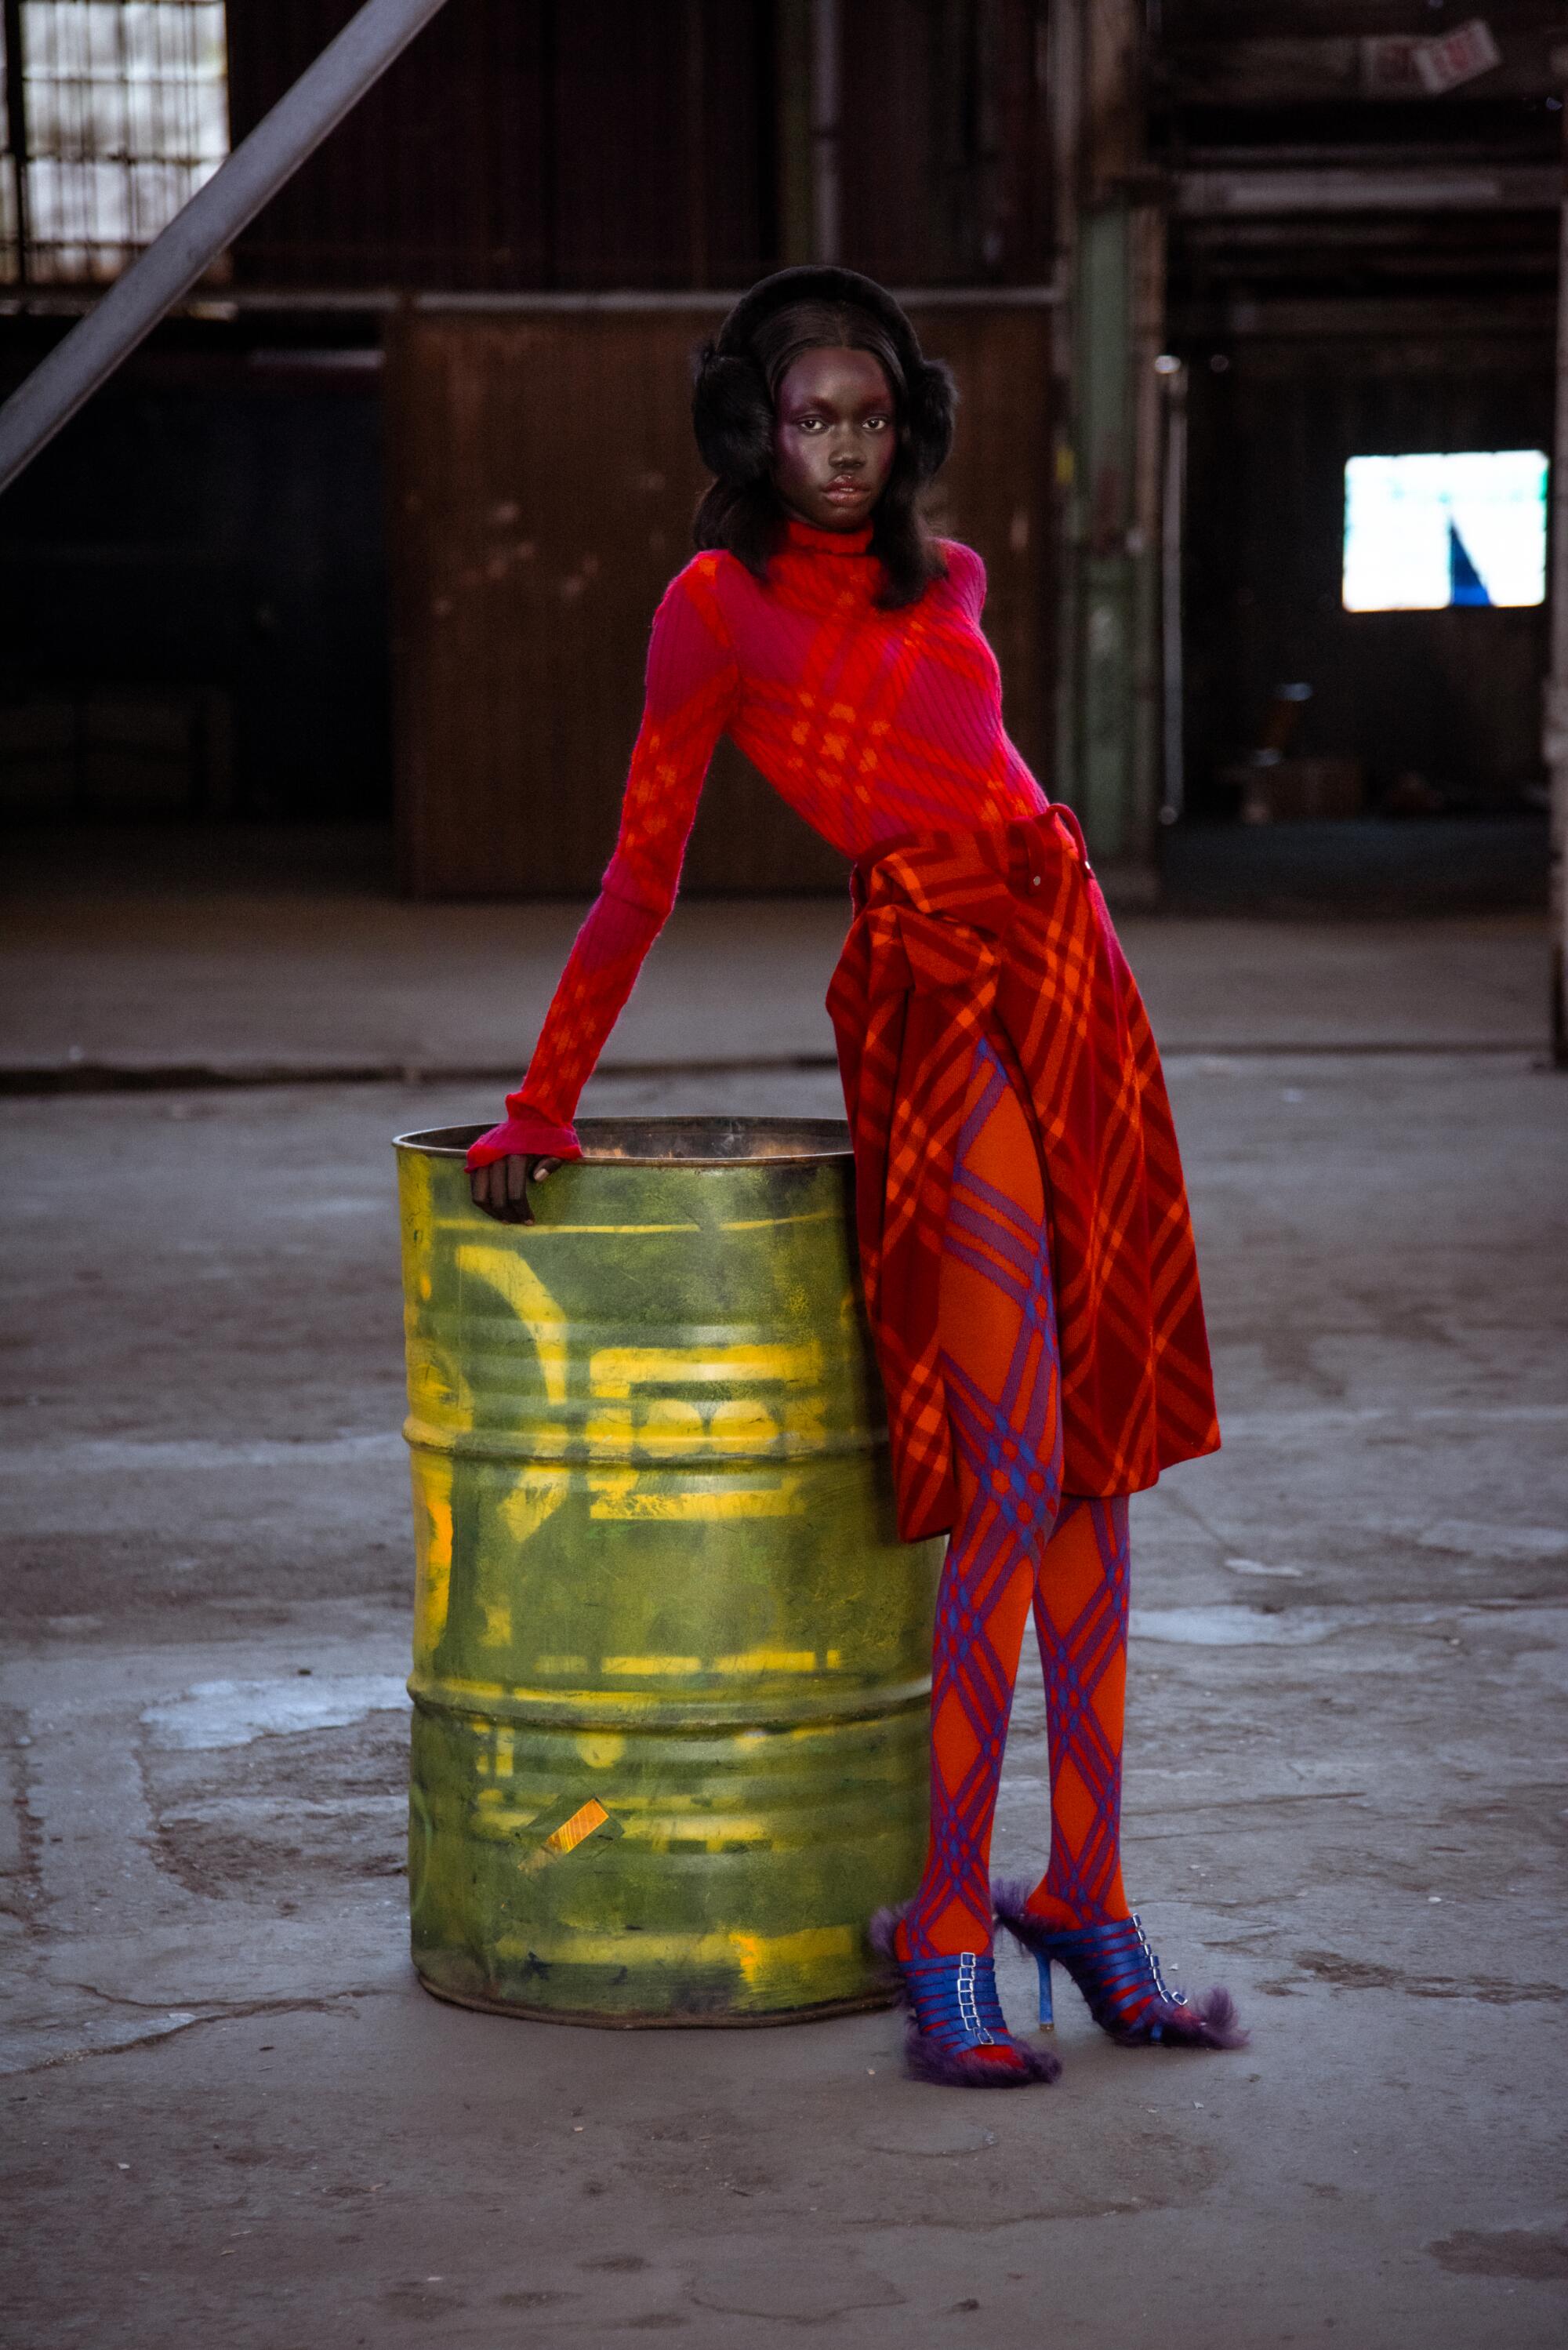 A model in red-orange clothes leans on a bright green trash barrel.